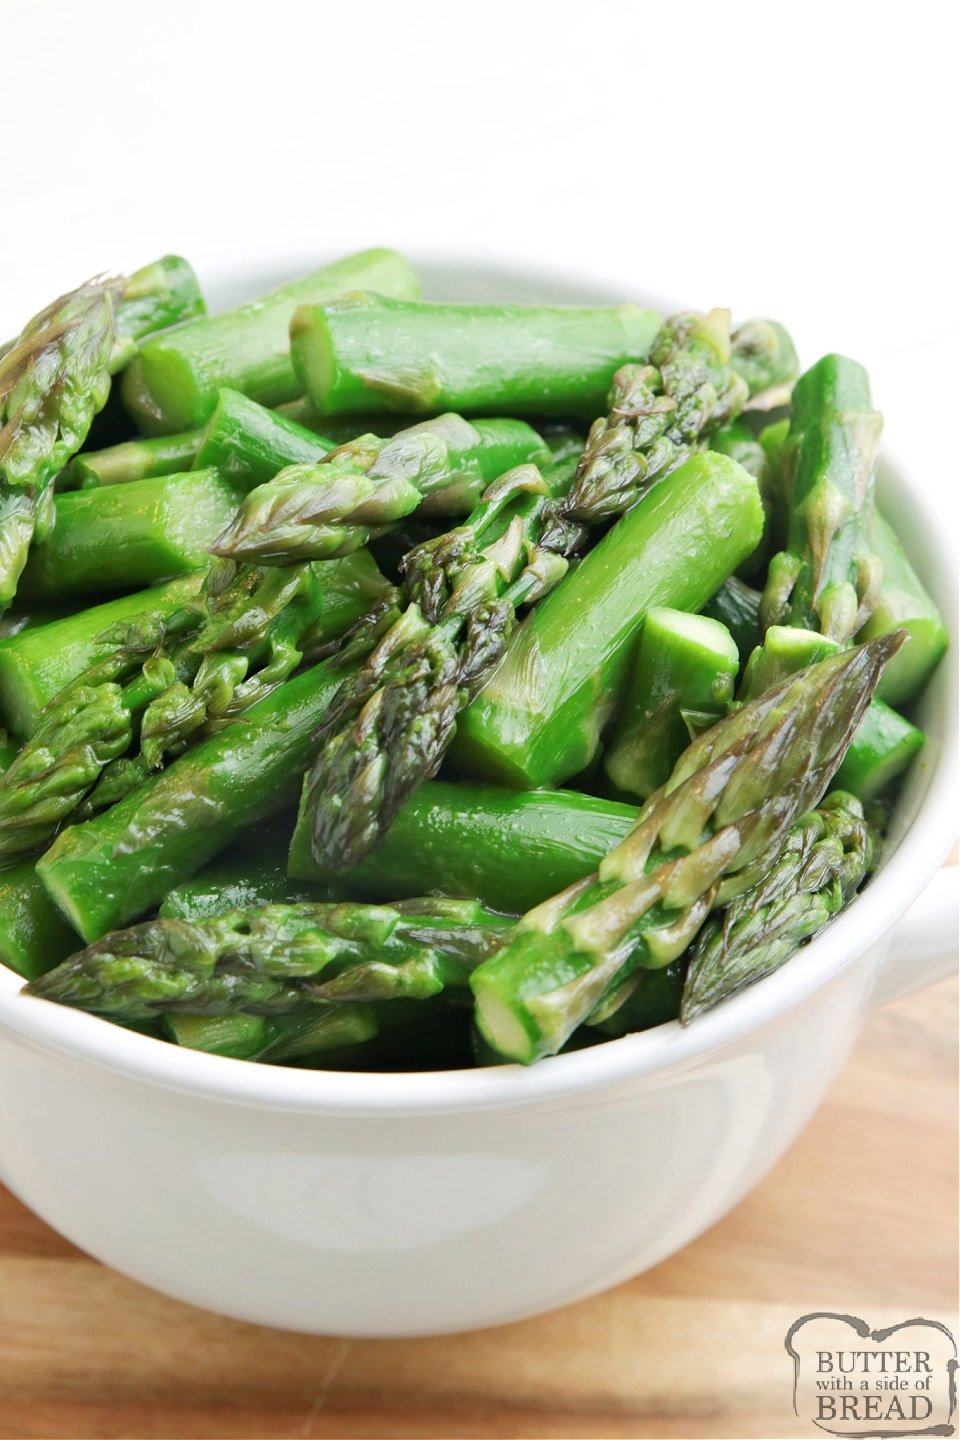 Sugared Asparagus recipe made with brown sugar, butter and chicken broth. Perfect balance of sweet and savory for a simple asparagus recipe that is made on the stove in just a few minutes.